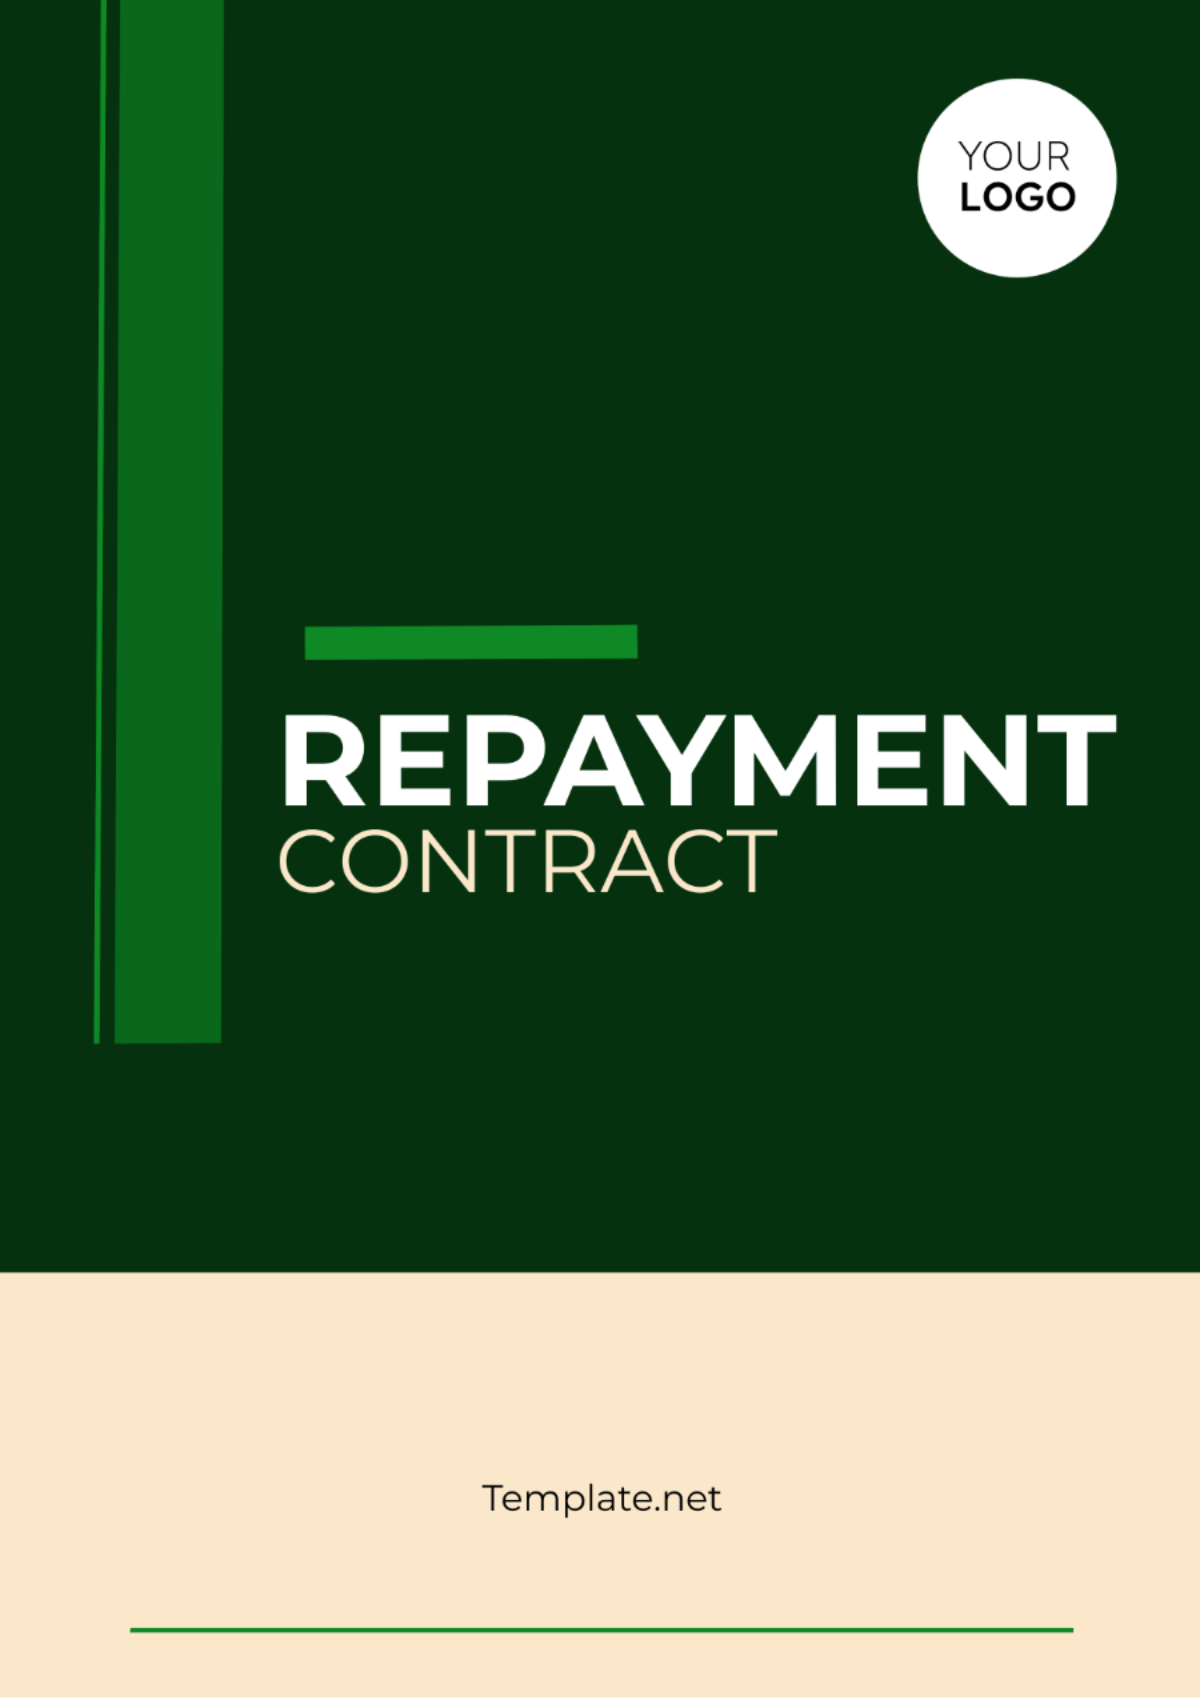 Repayment Contract Template